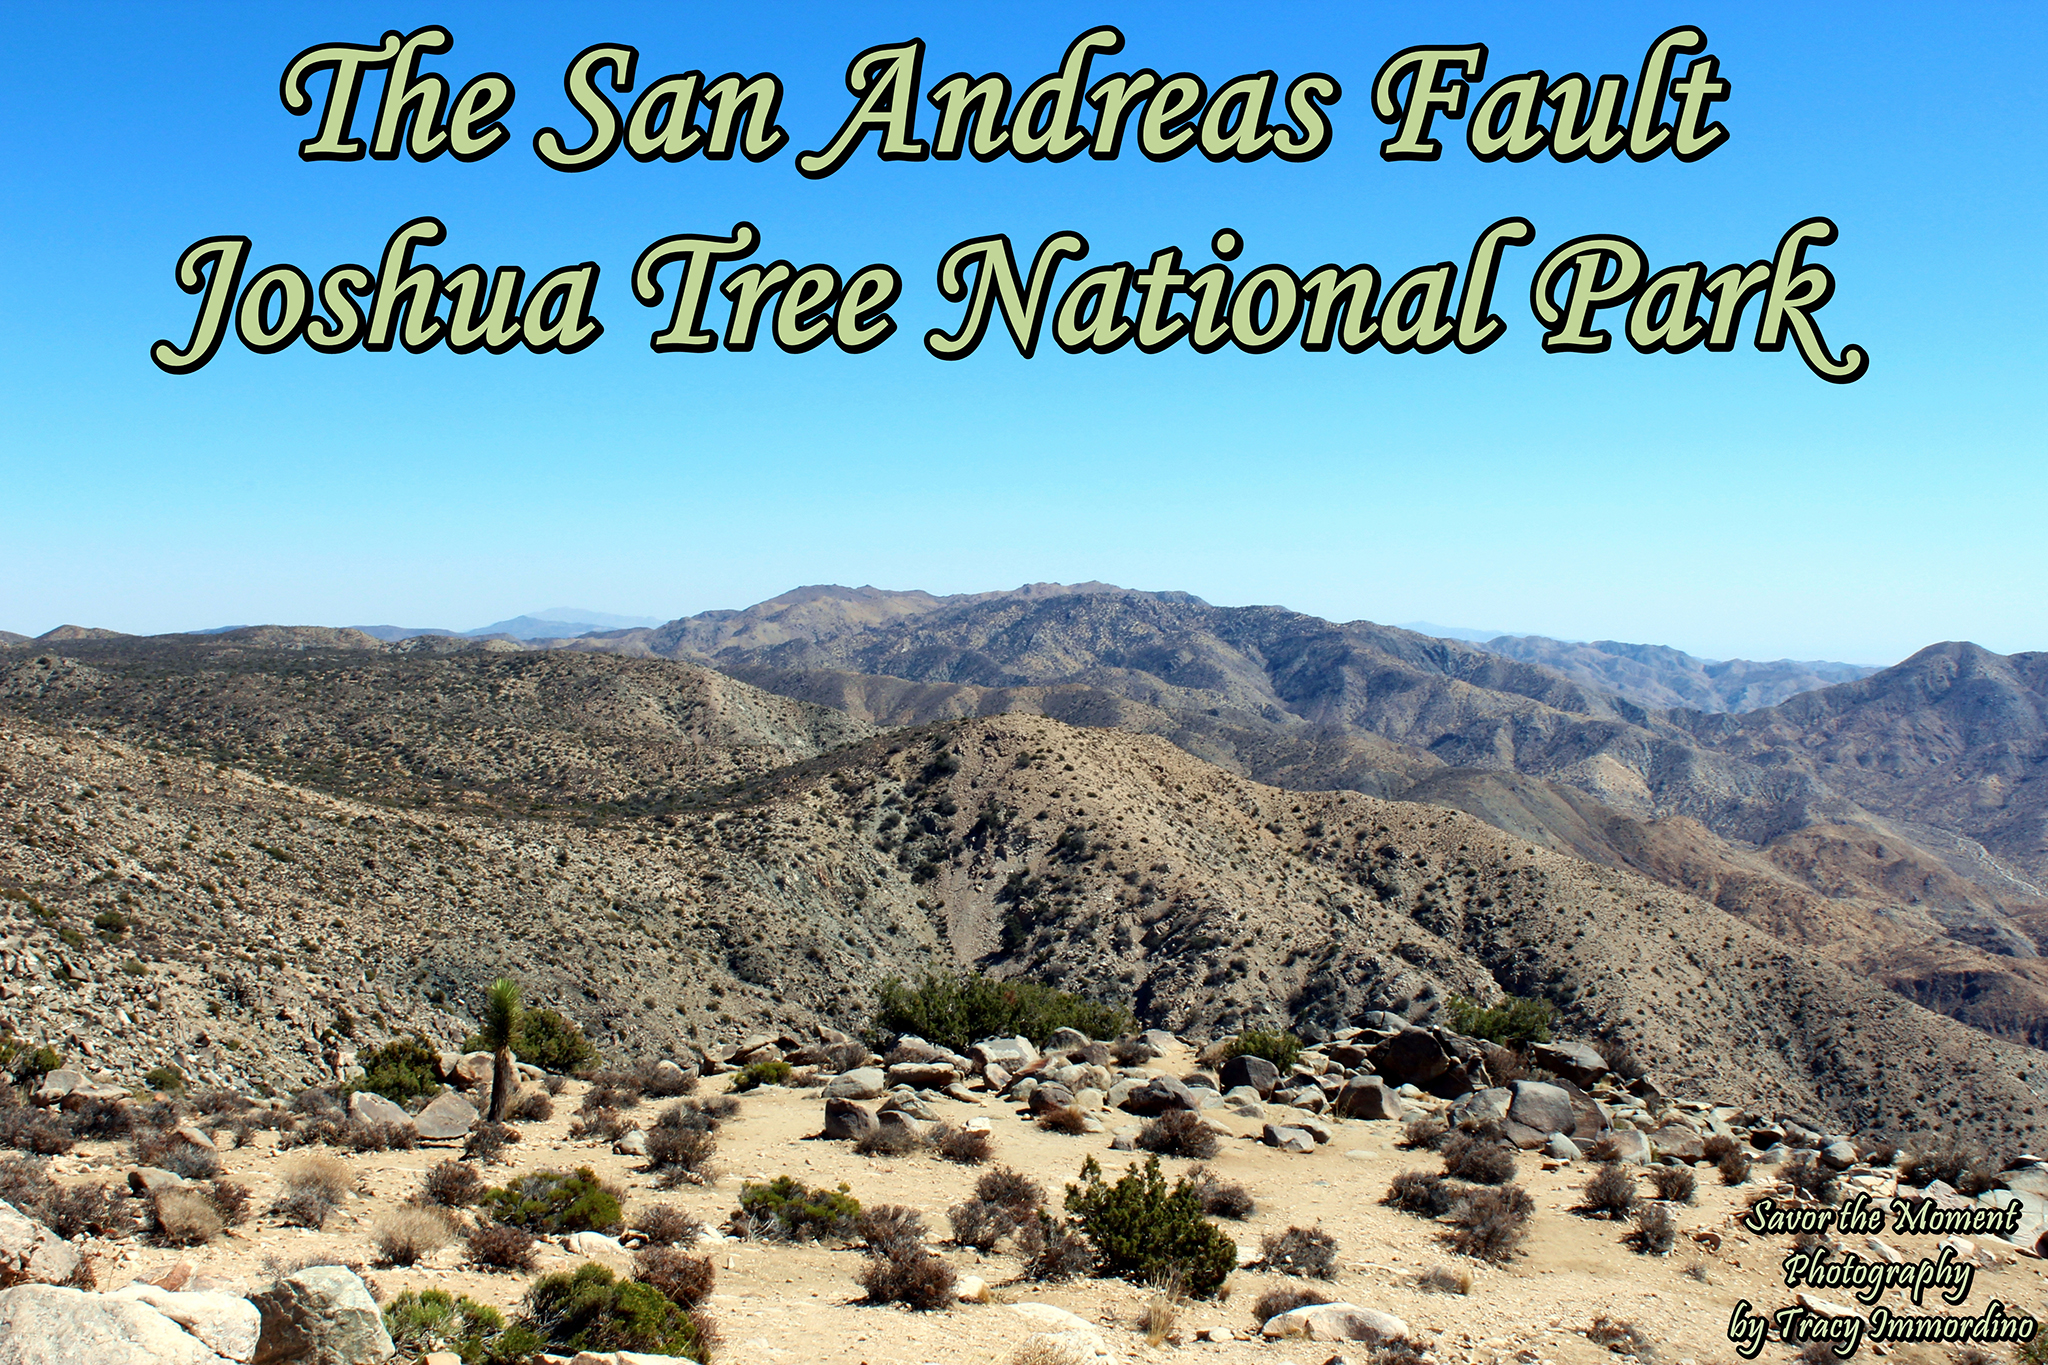 The San Andreas Fault in Joshua Tree National Park